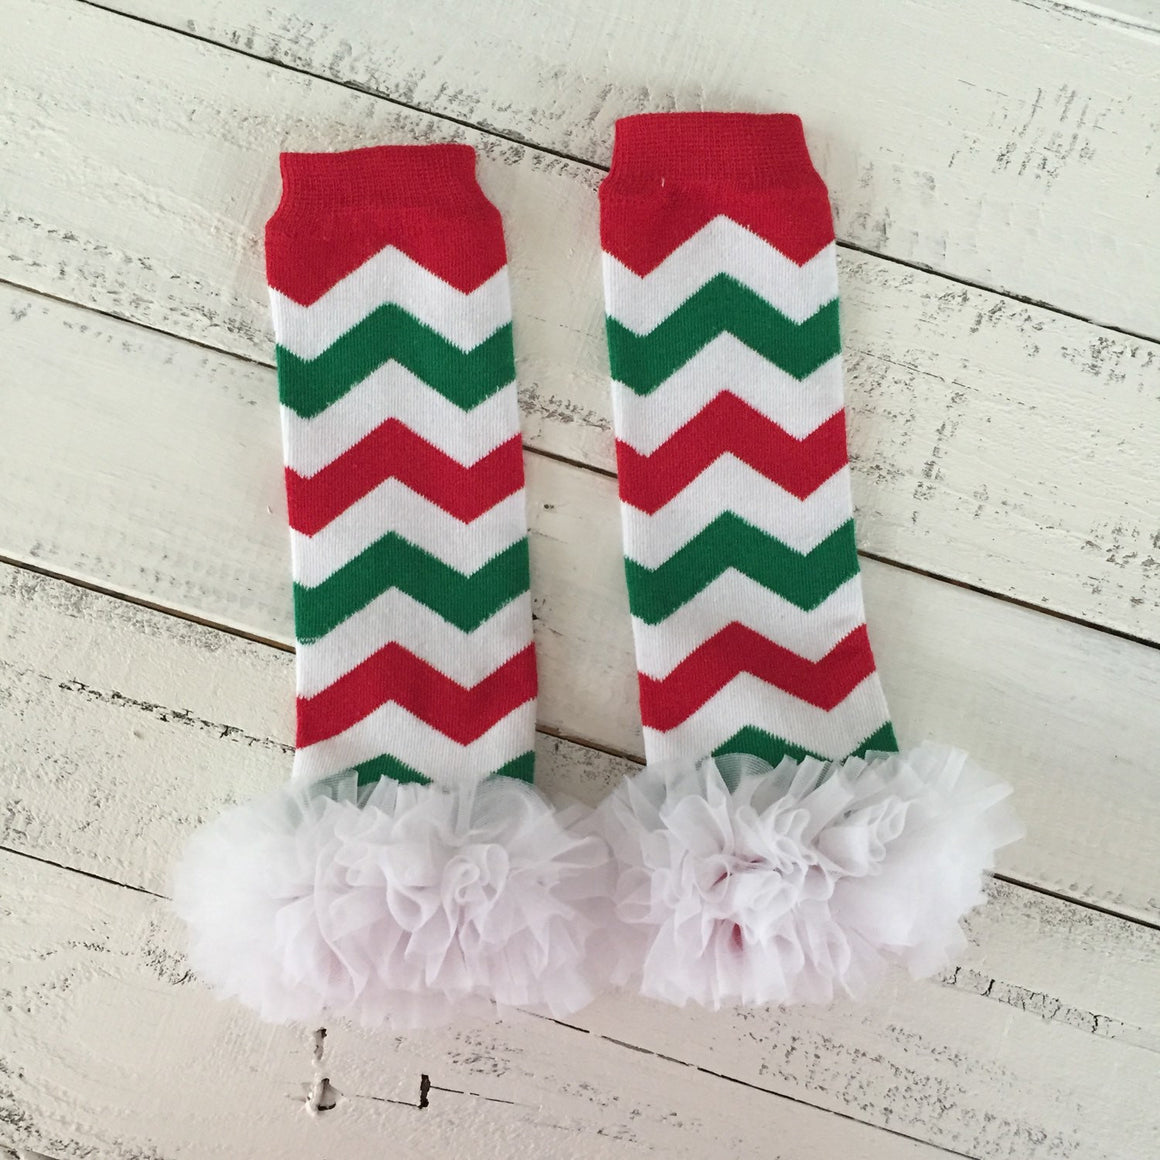 Leg Warmers - Christmas Red/White/Green with white ruffles - HoneyLoveBoutique